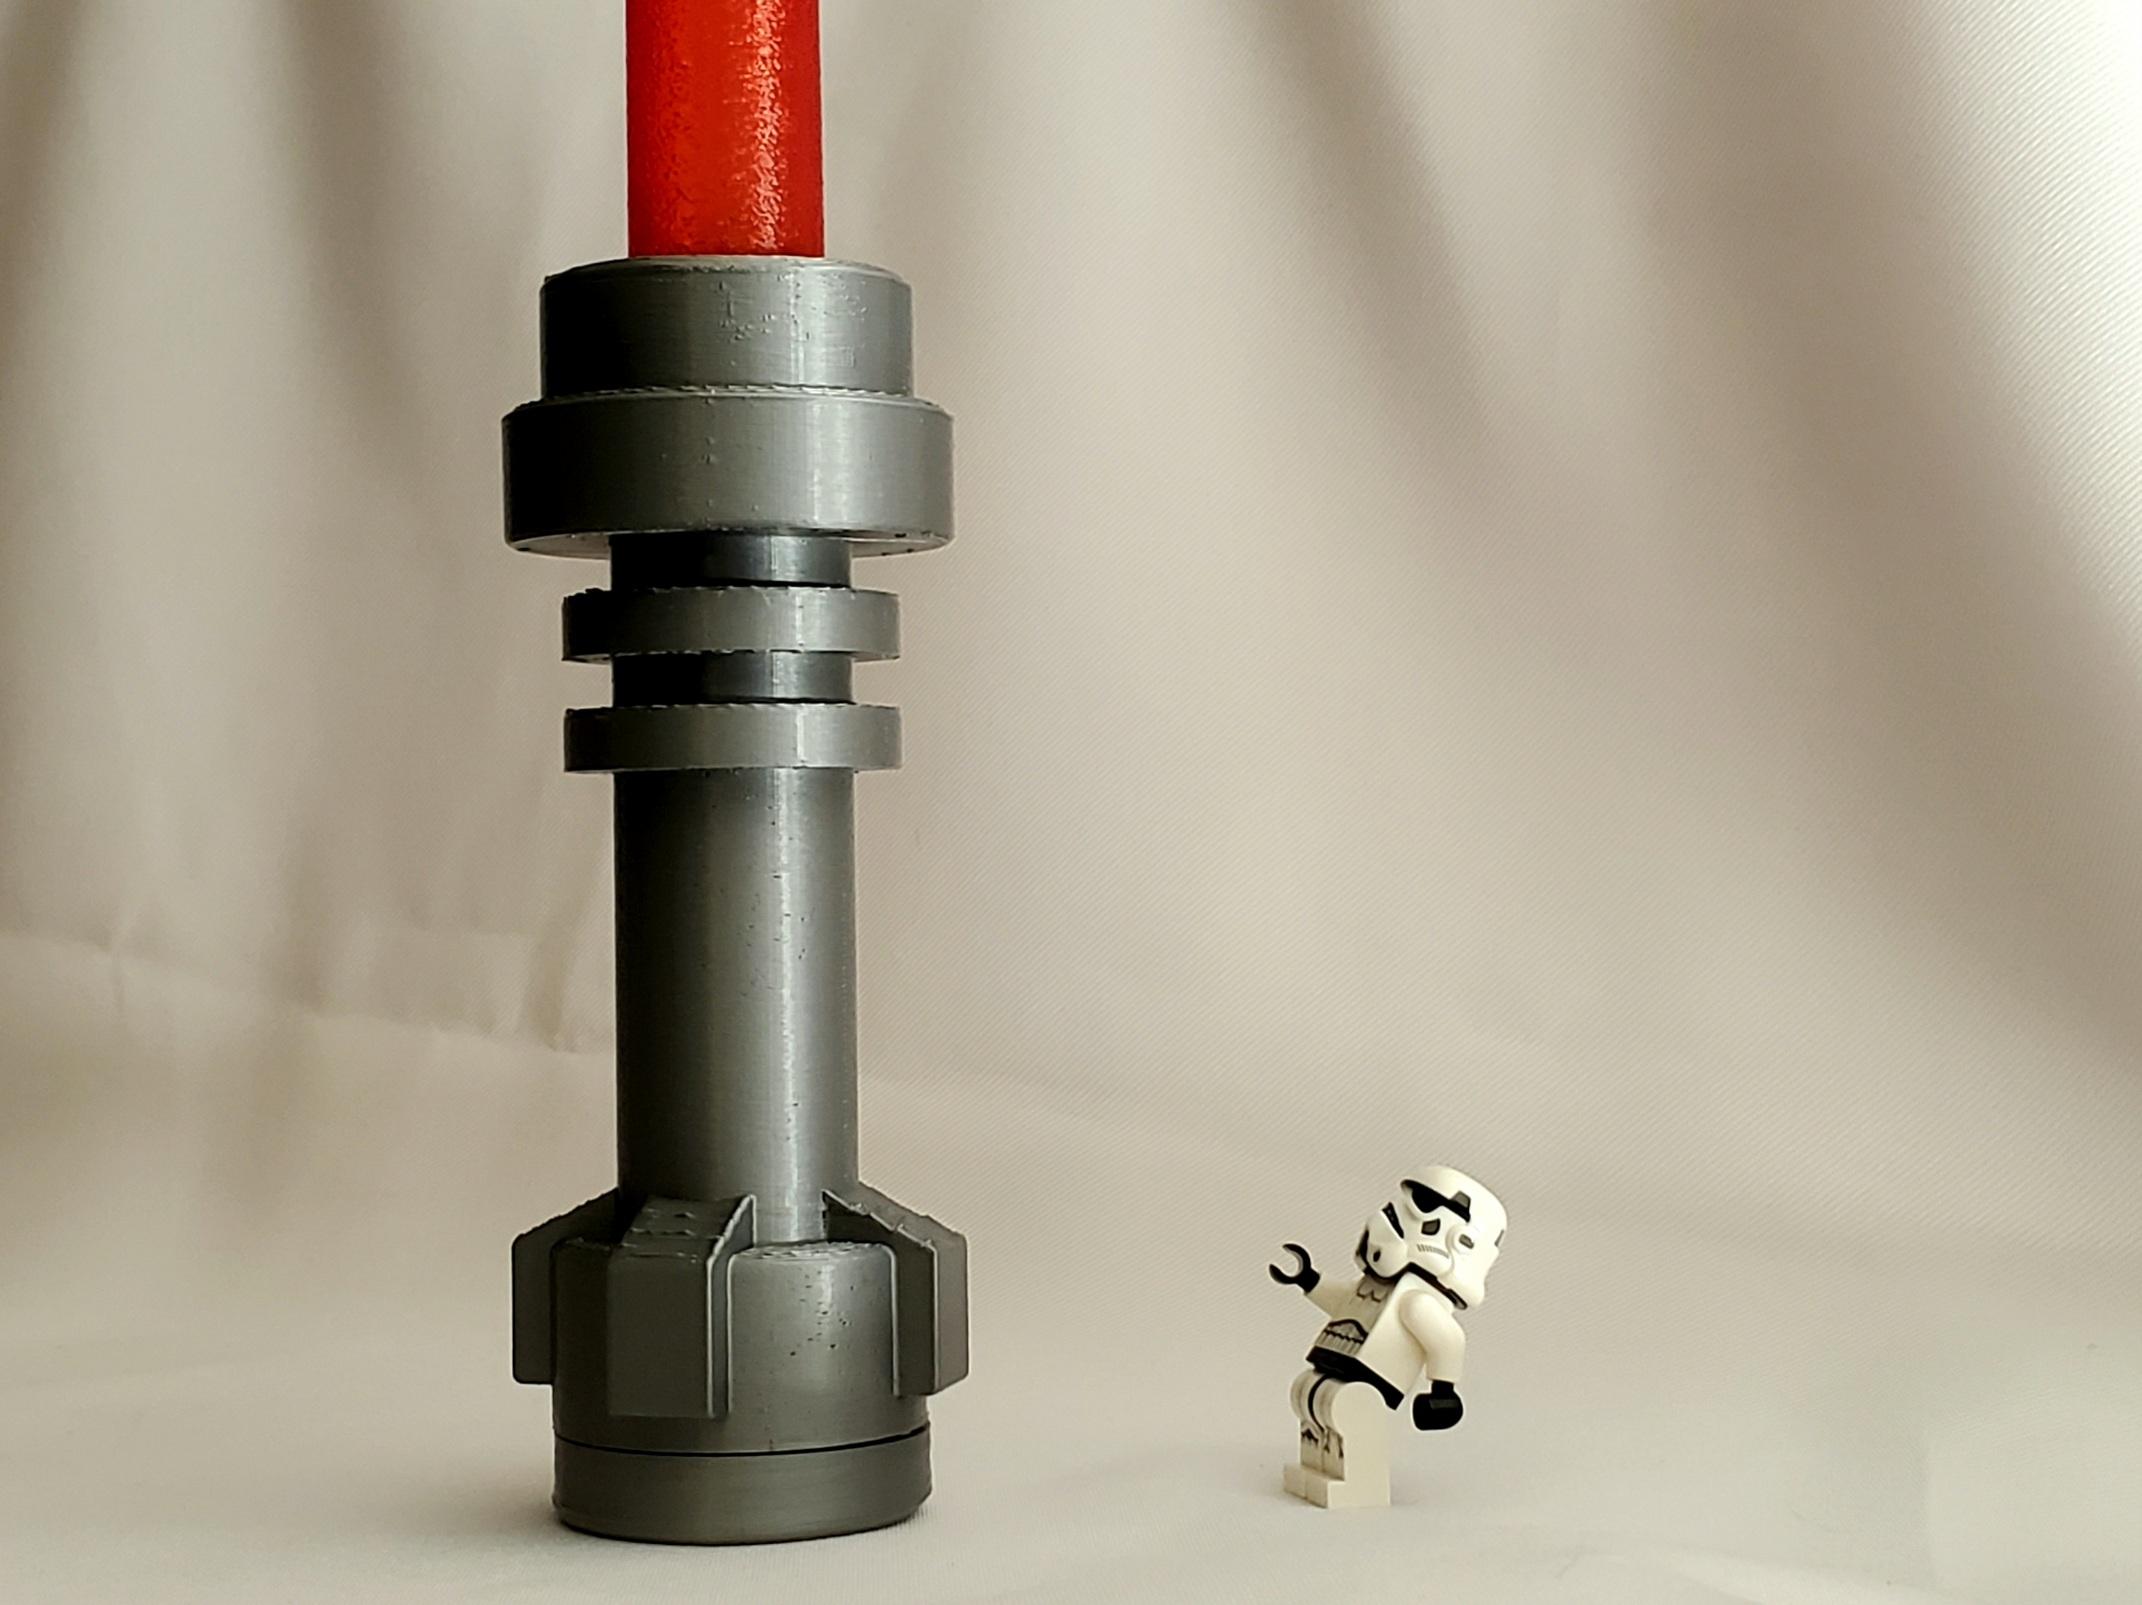 Lego Inspired Light Saber - From a galaxy not so far away... - 3d model